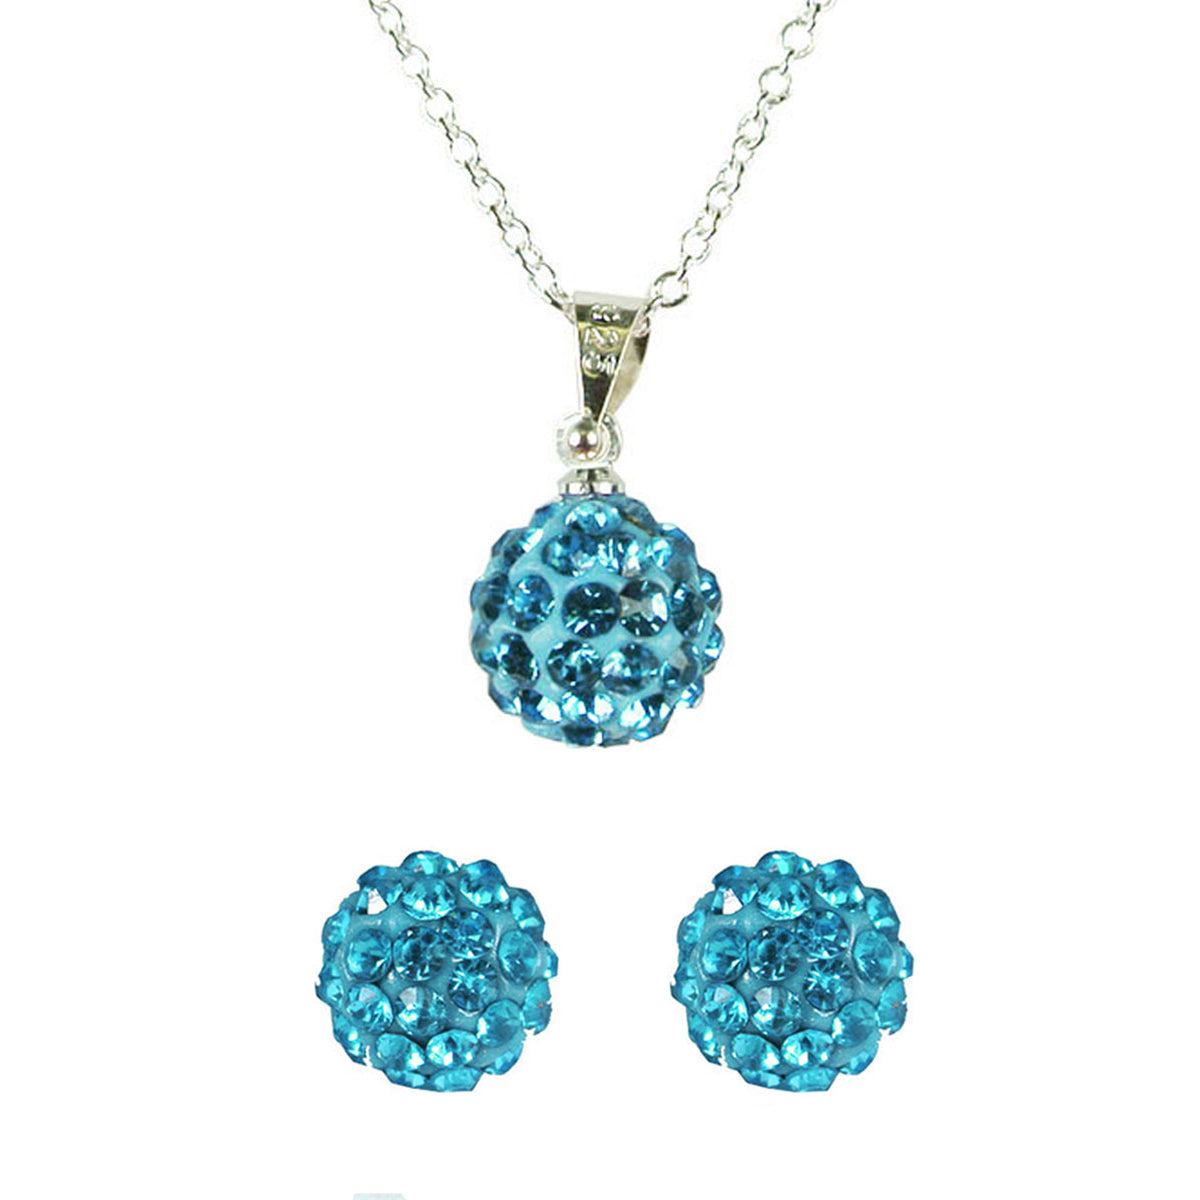 Wrapables Crystal Disco Ball Pendant Necklace and Stud Earrings Jewelry Set